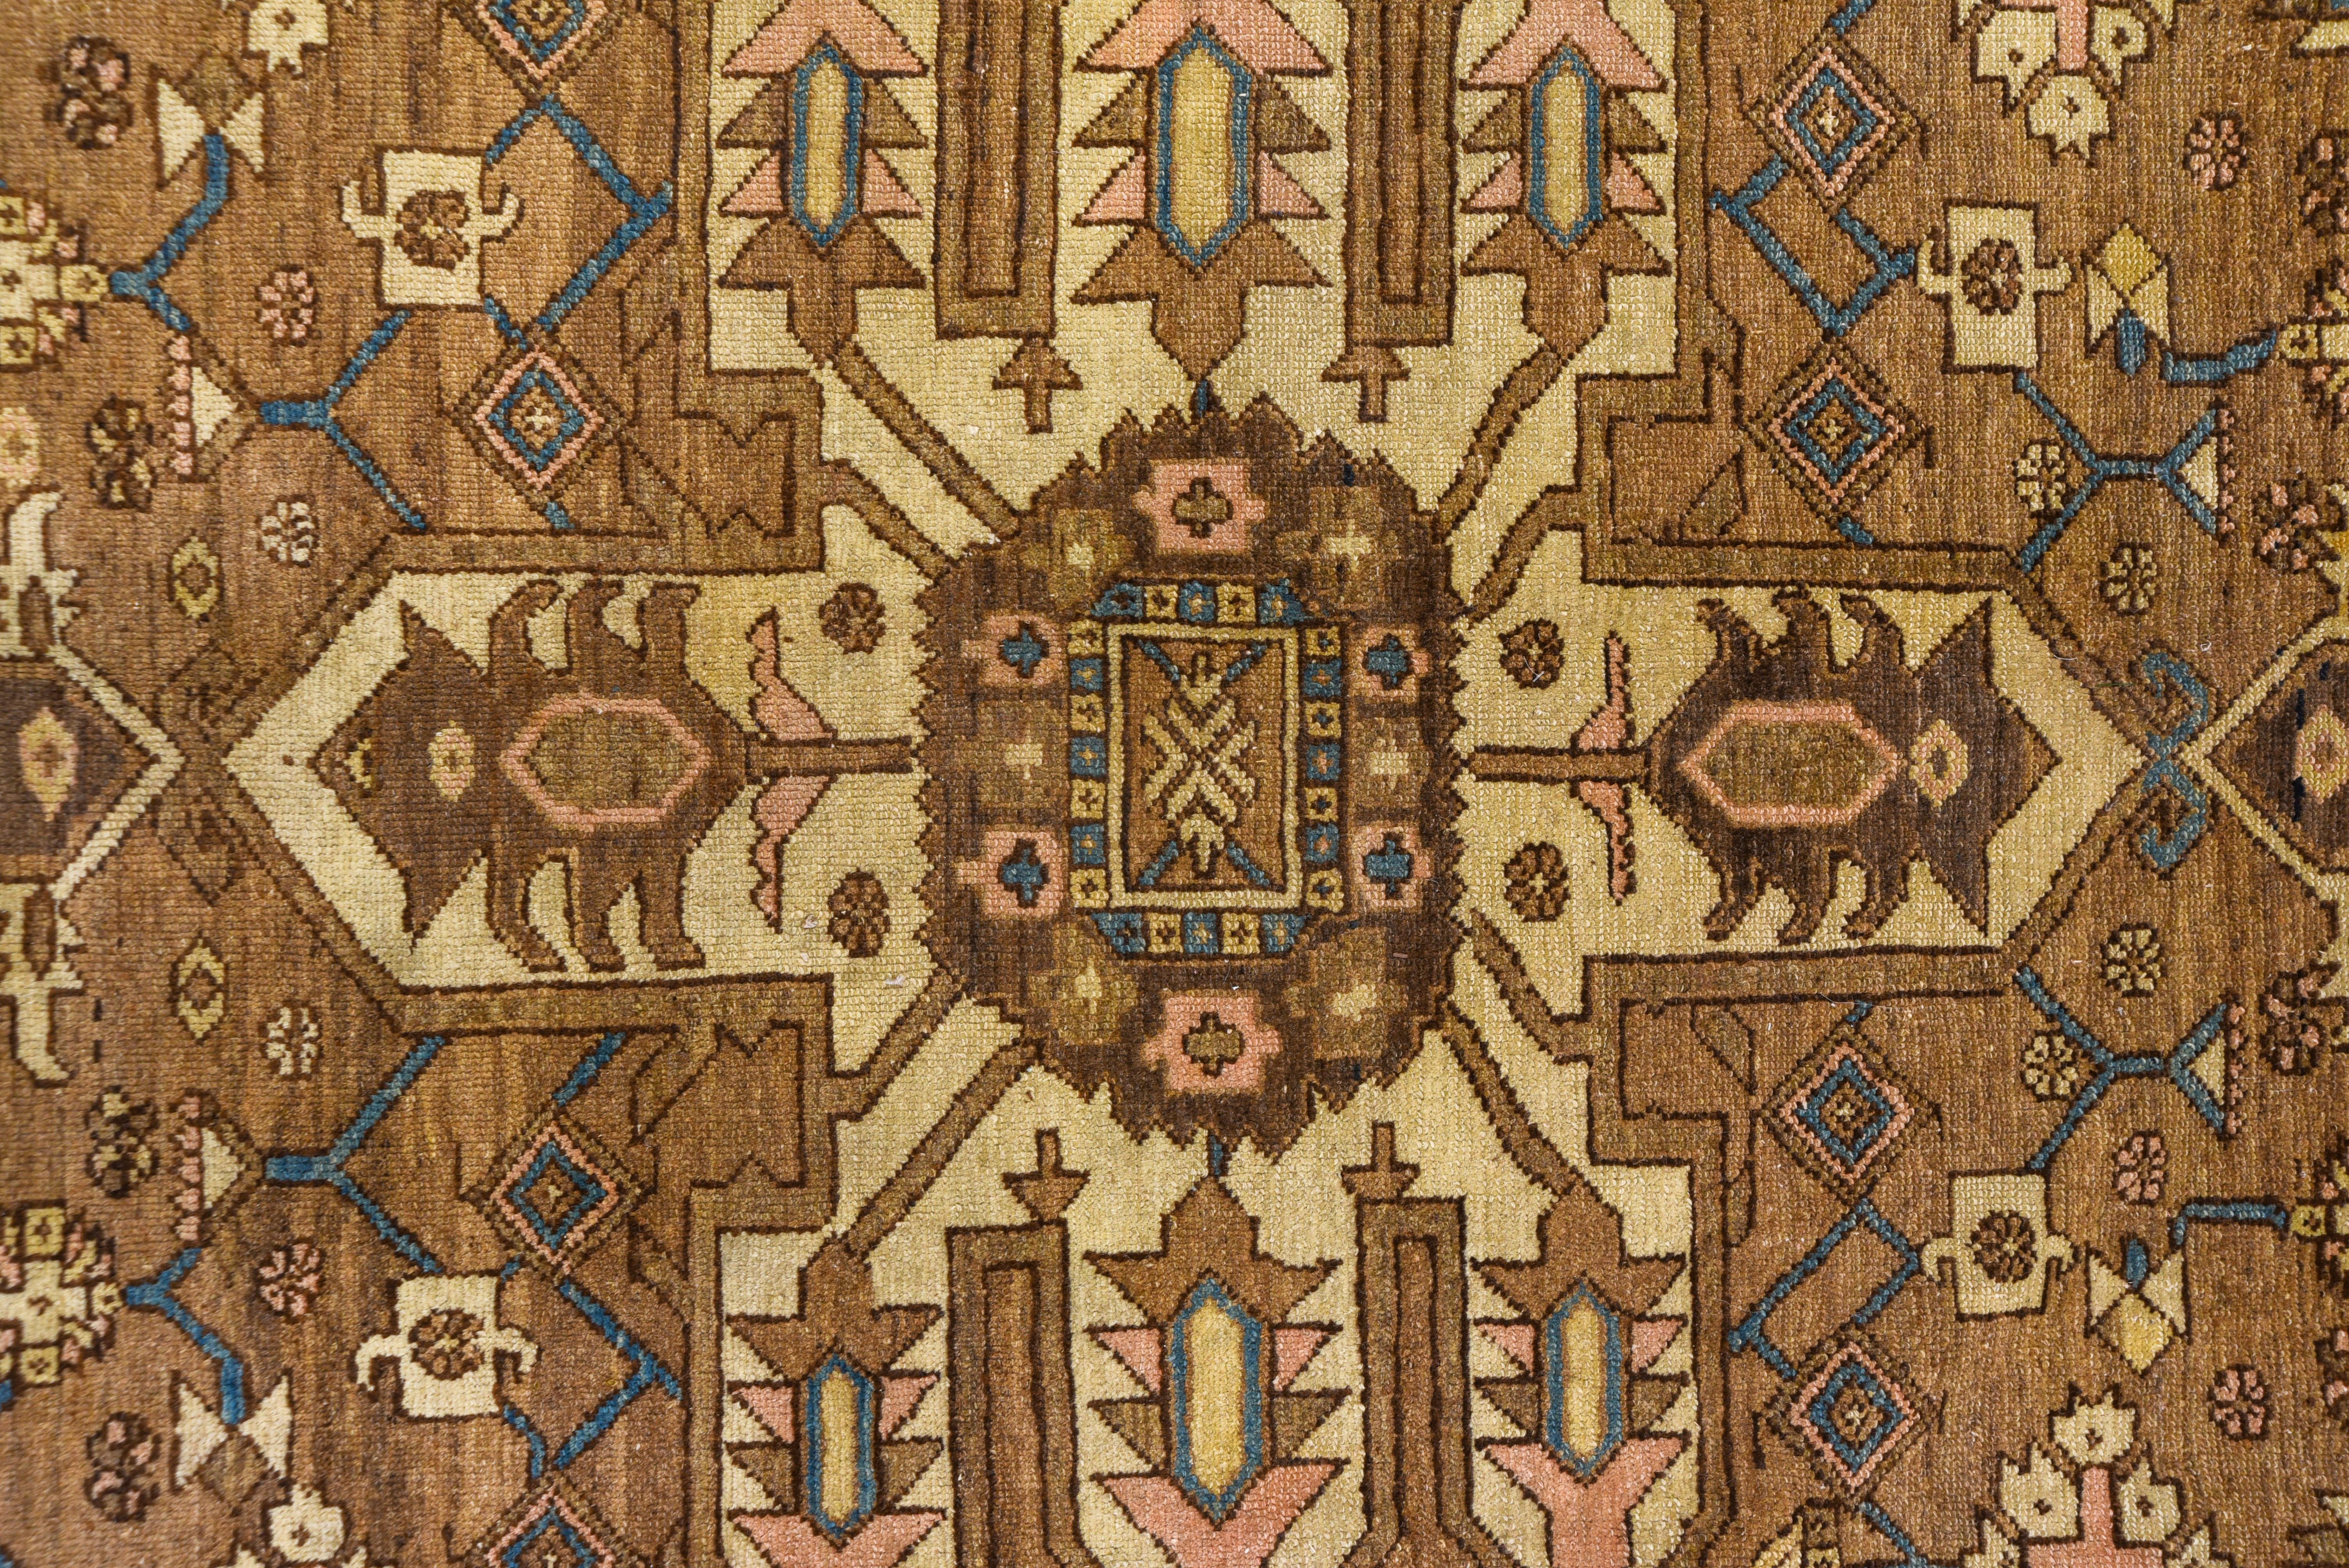 This carpet has a light brownish field centered by an ivory octofoil medallion with pendant chains. The tonally end suite border of this good condition NW Persian rustic carpet has a skeletal turtle palmette design. The Serapi Heriz grade stands at